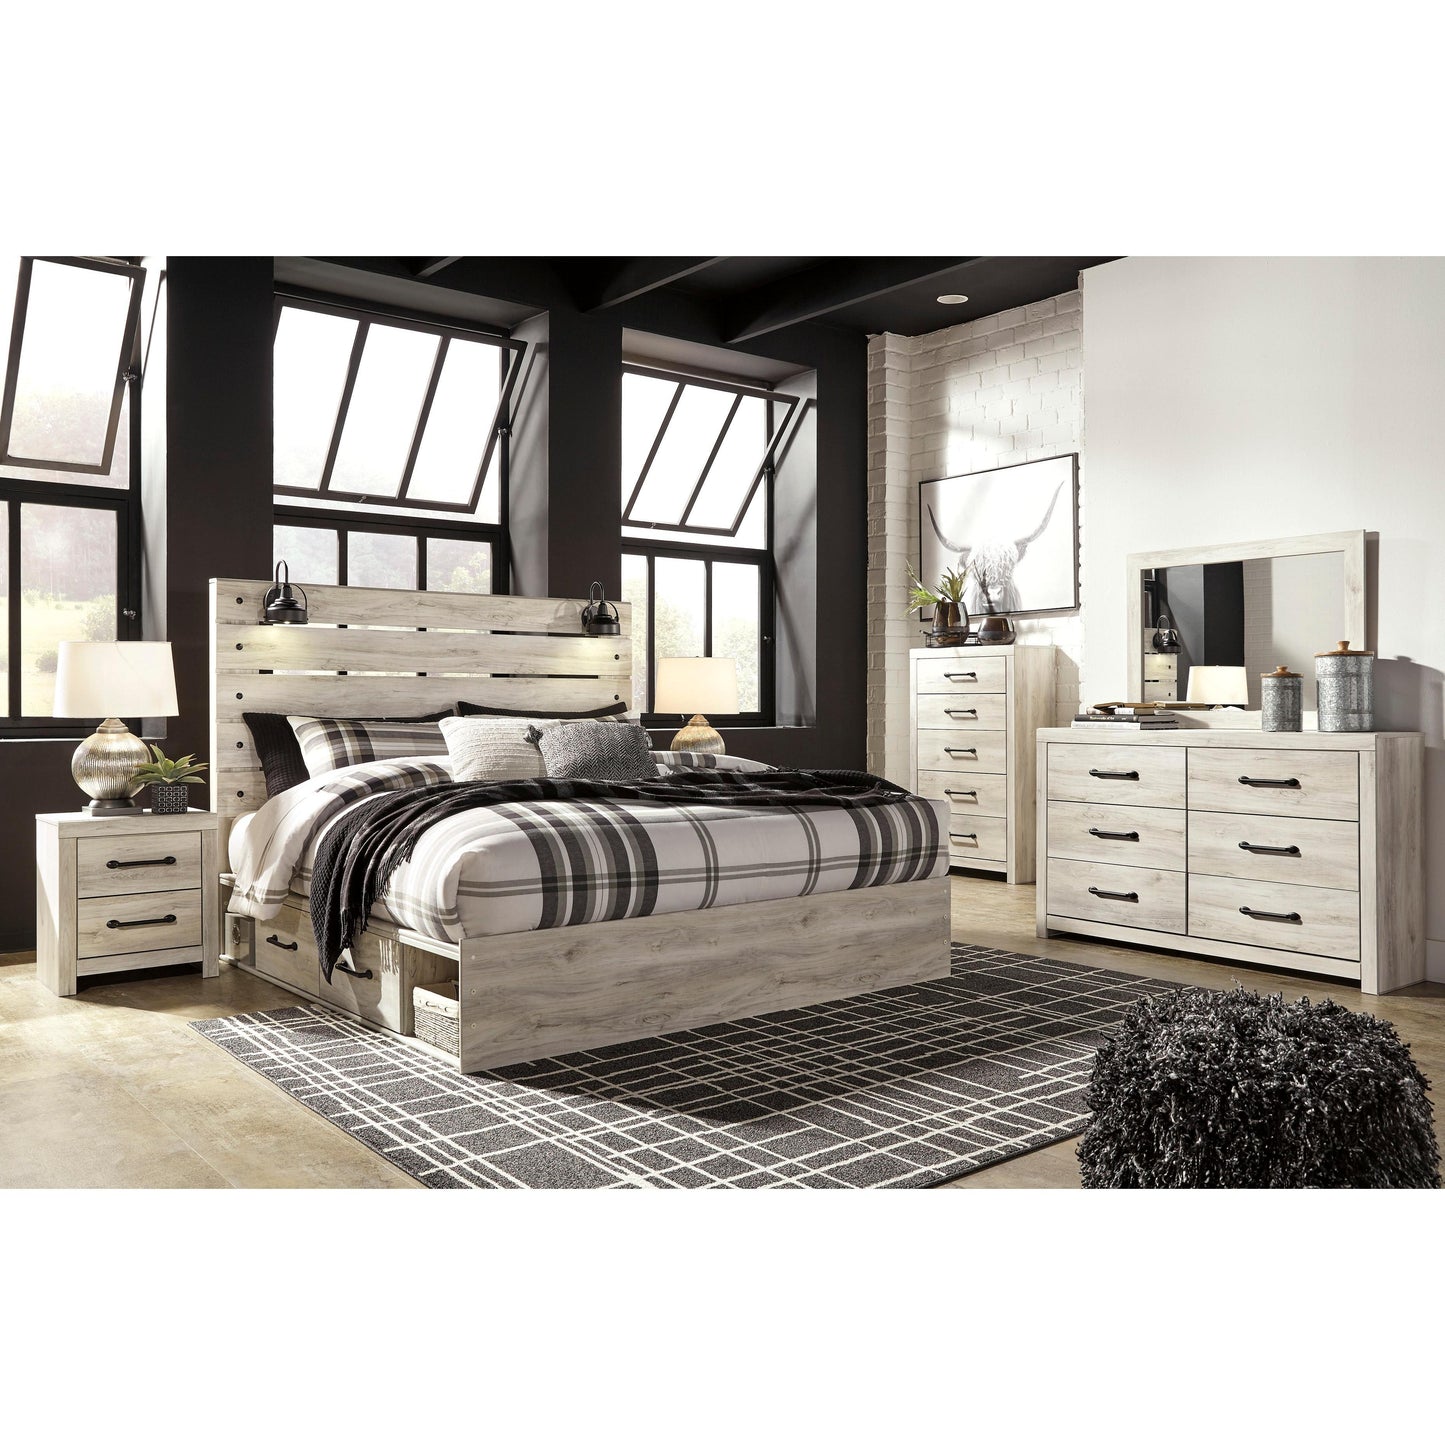 Signature Design by Ashley Cambeck B192B52 6 pc King Panel Bedroom Set IMAGE 1